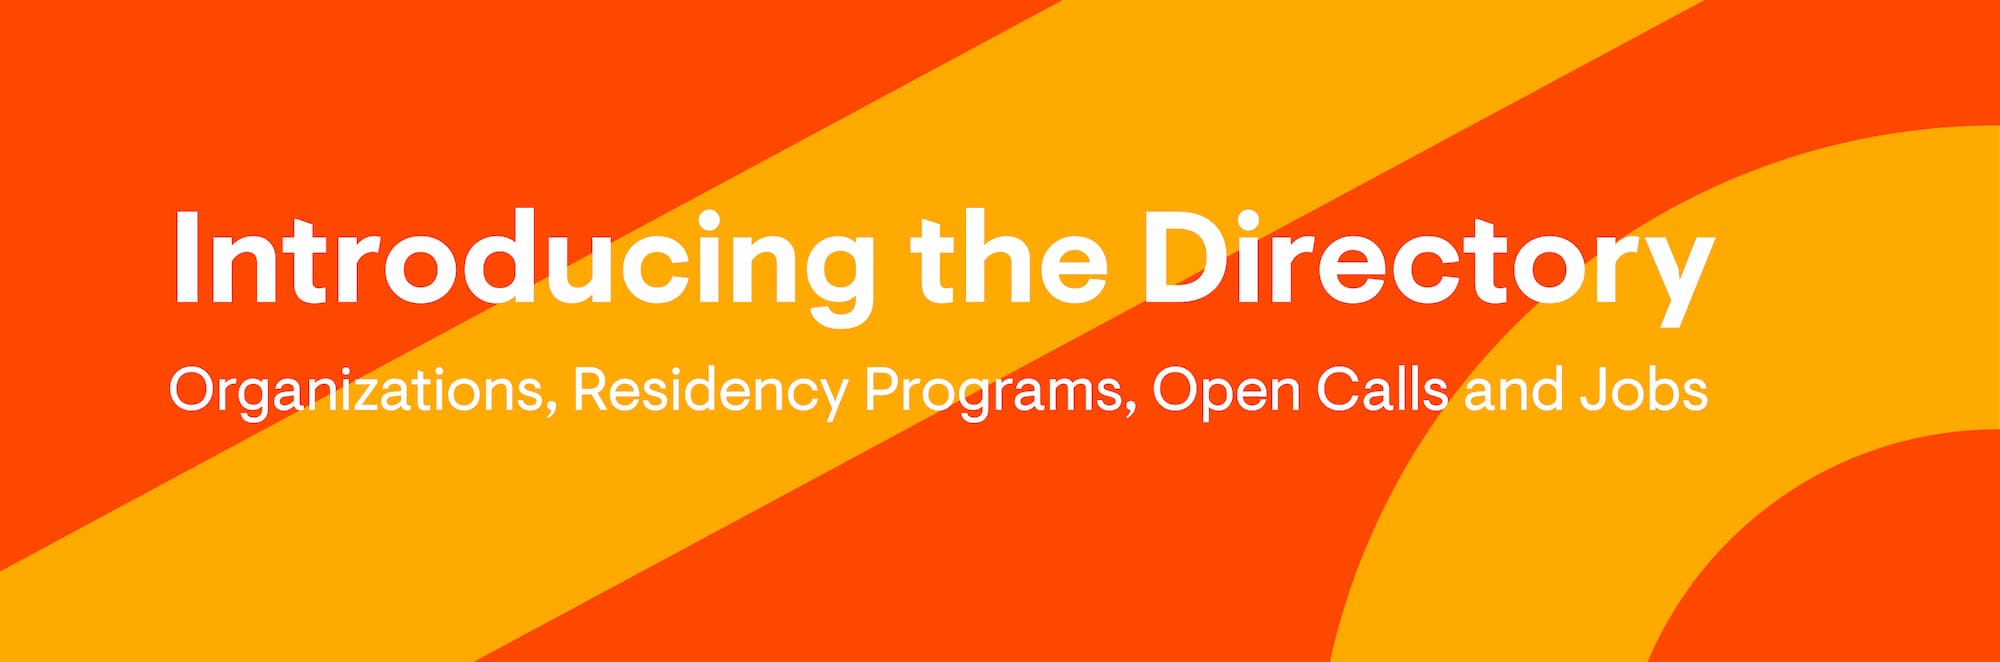 Introducing the Directory banner image in yellow and orange